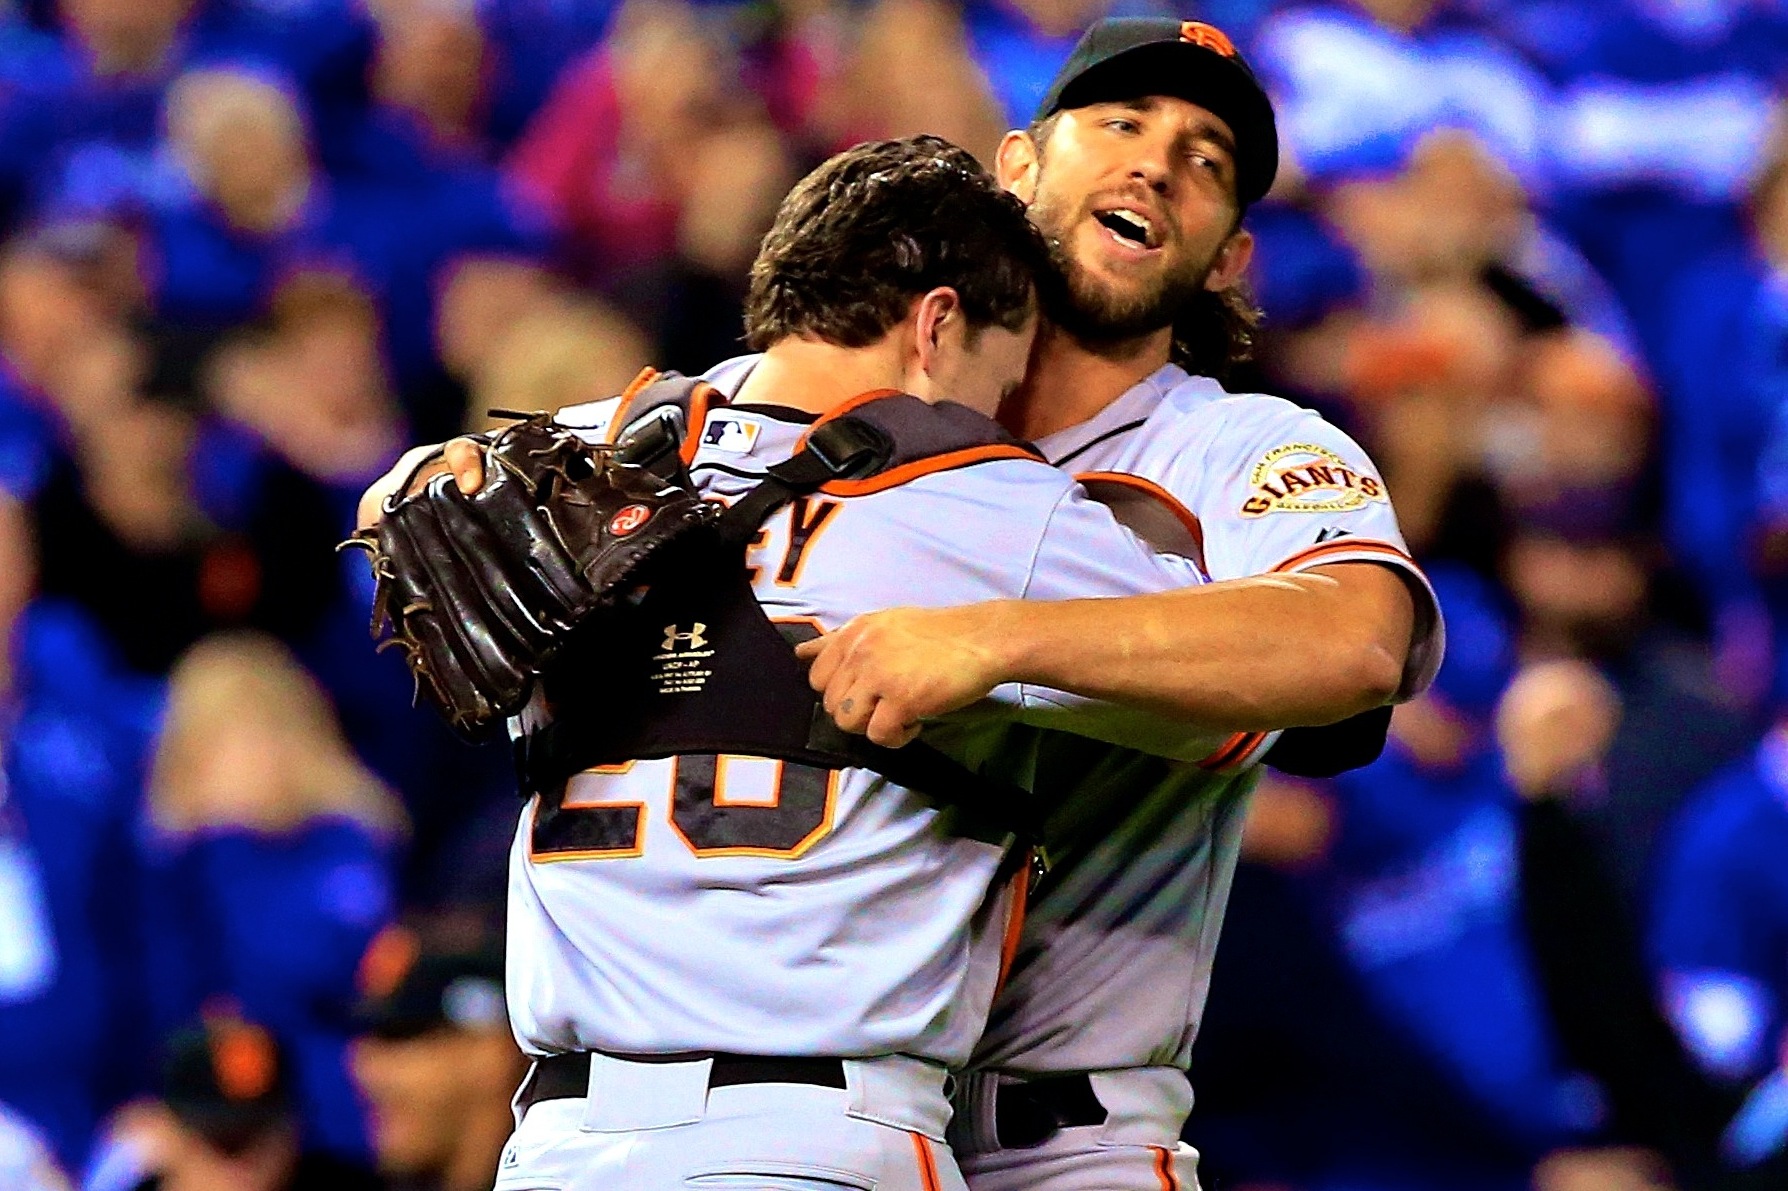 Giants vs. Royals: Game 7 Score and Twitter Reaction from 2014